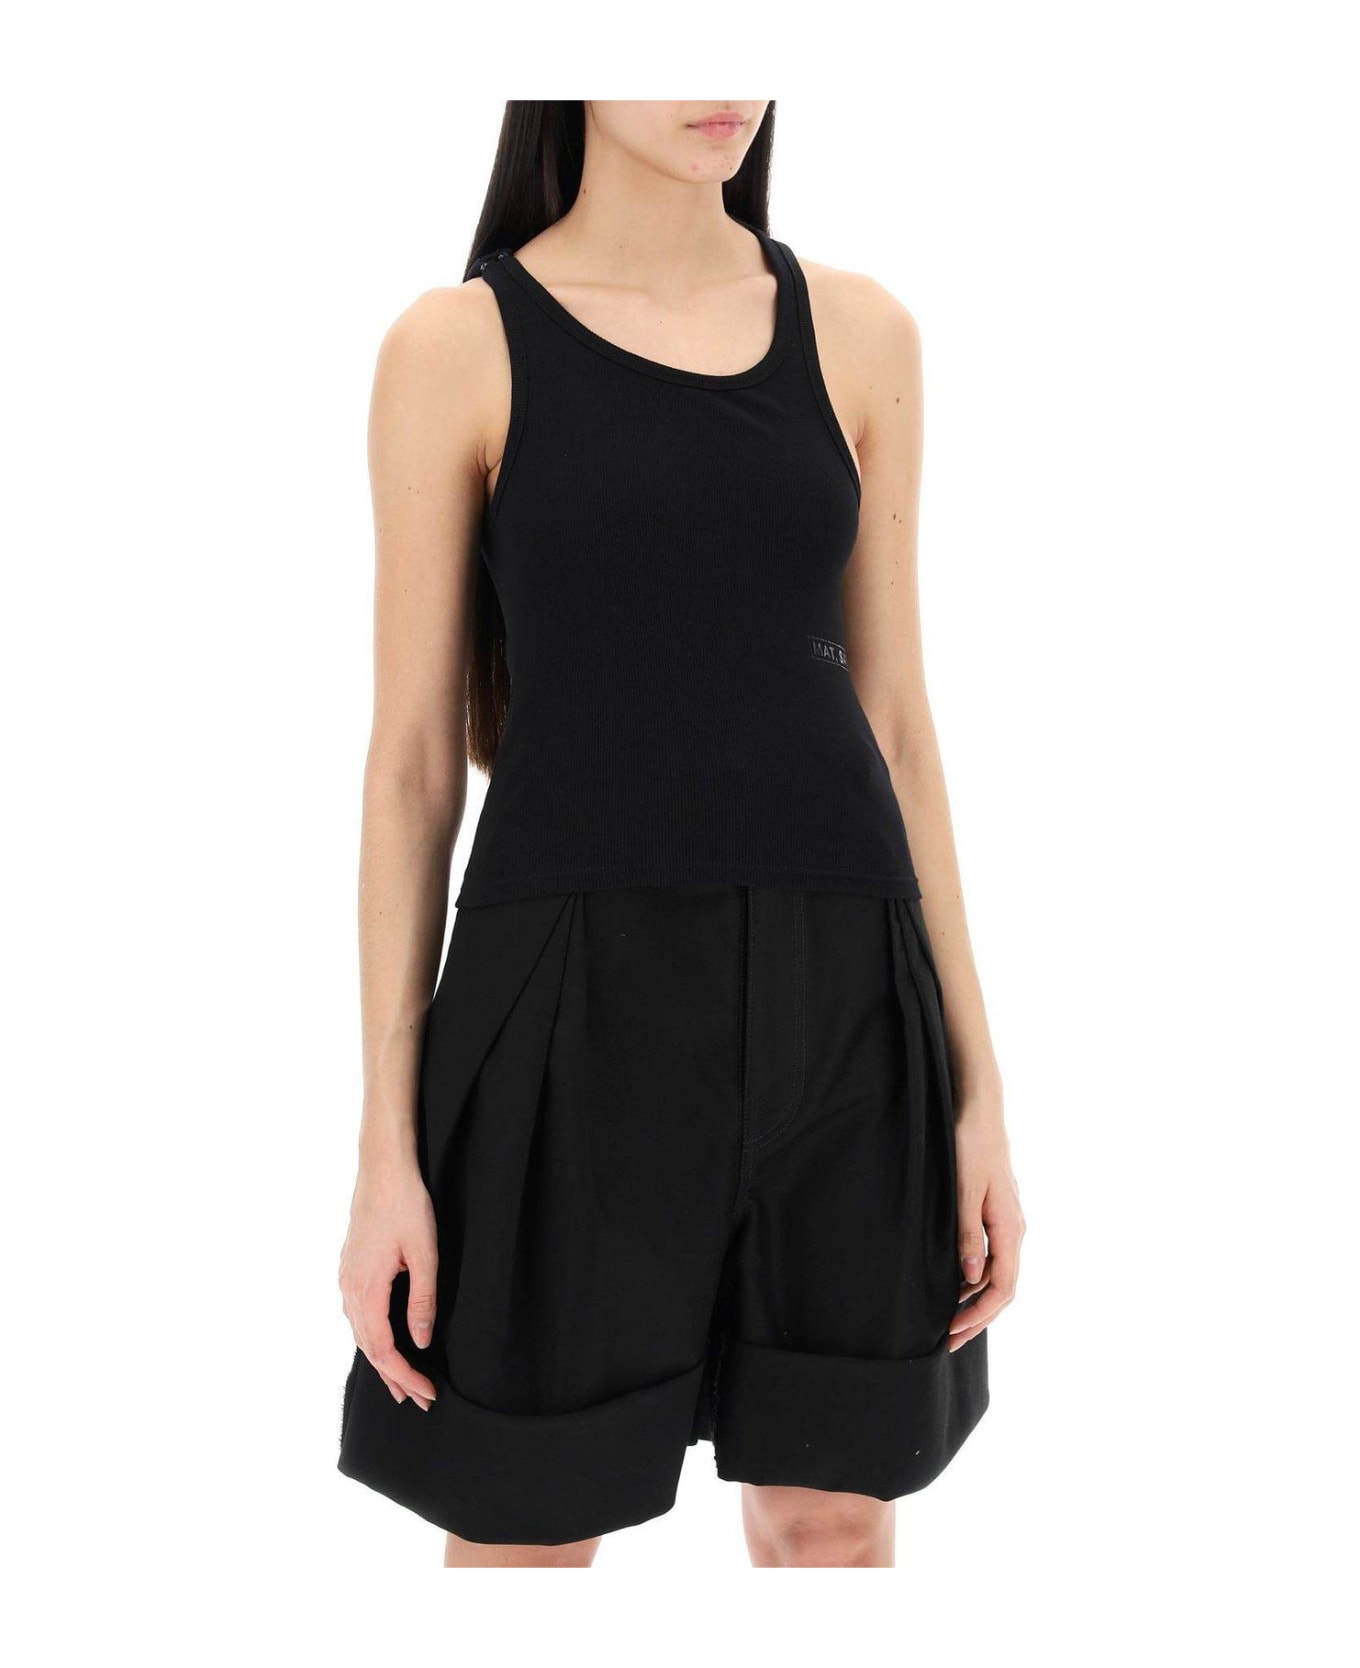 MM6 Maison Margiela Cut-out Detailed Ribbed Tank Top - Black タンクトップ